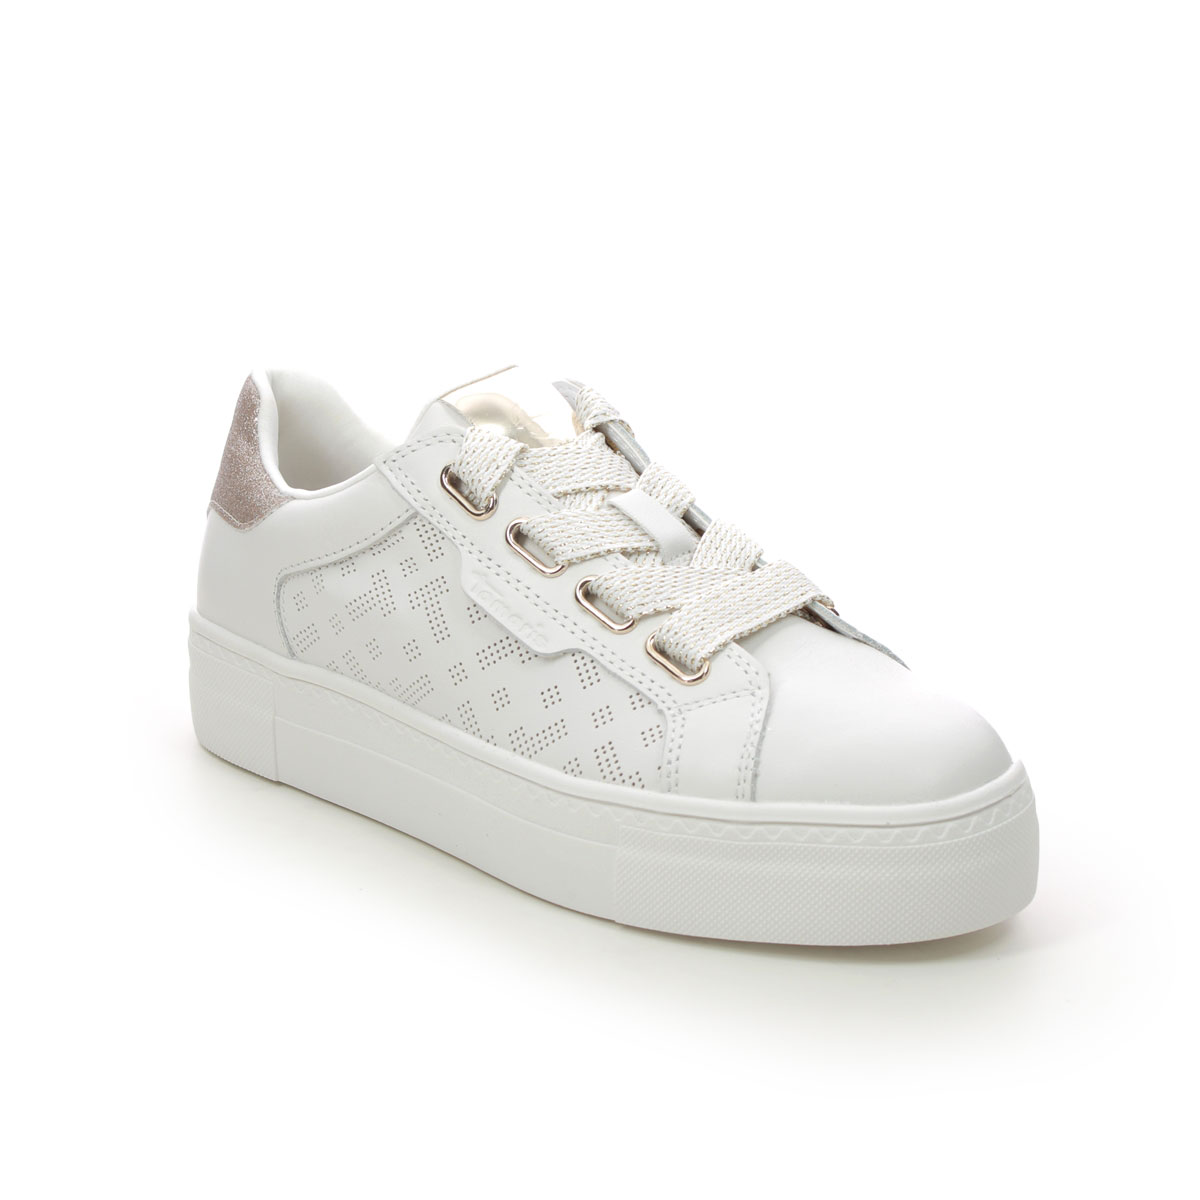 Tamaris Lima White Gold Womens Trainers 23707-20-190 In Size 37 In Plain White Gold